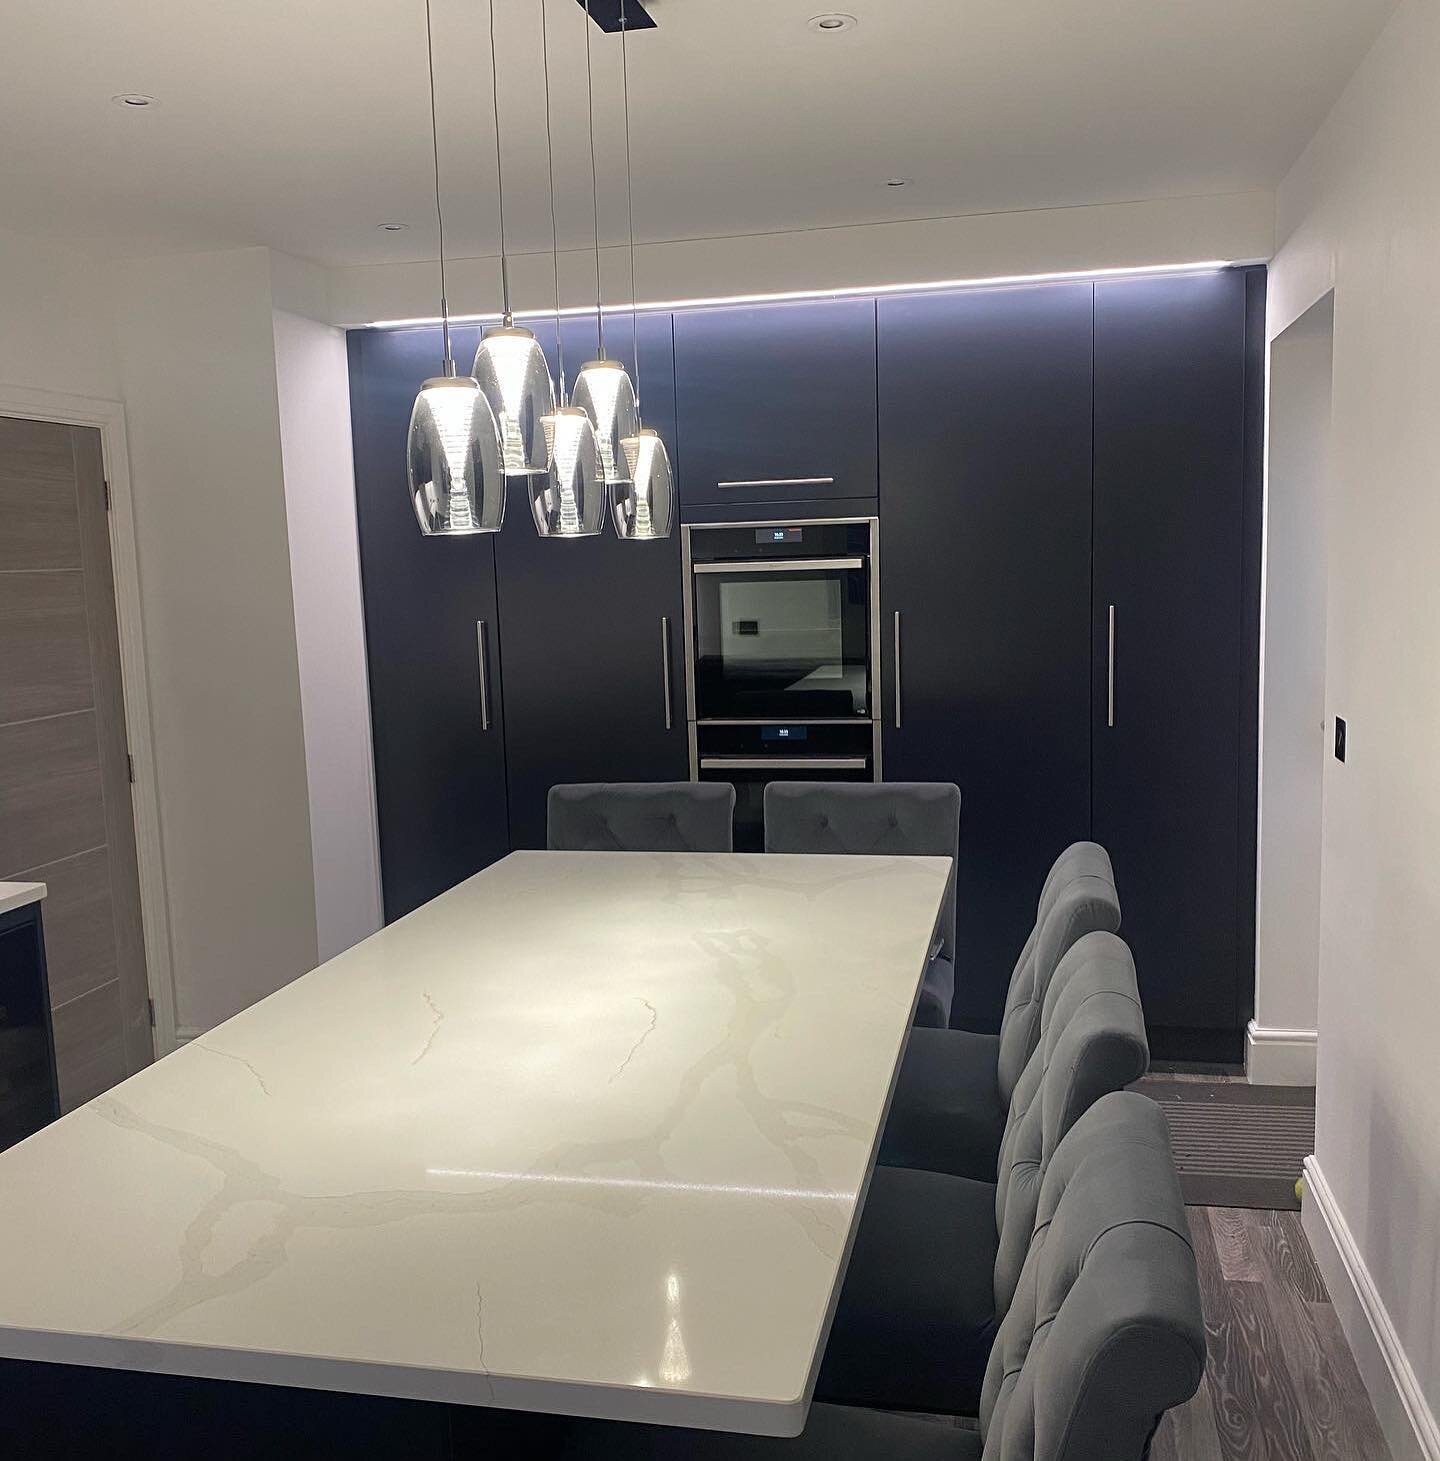 If you&rsquo;re looking to update your kitchen, Indigo could be the perfect choice for a dramatic yet elegant look. Please get in touch with us to find out more!